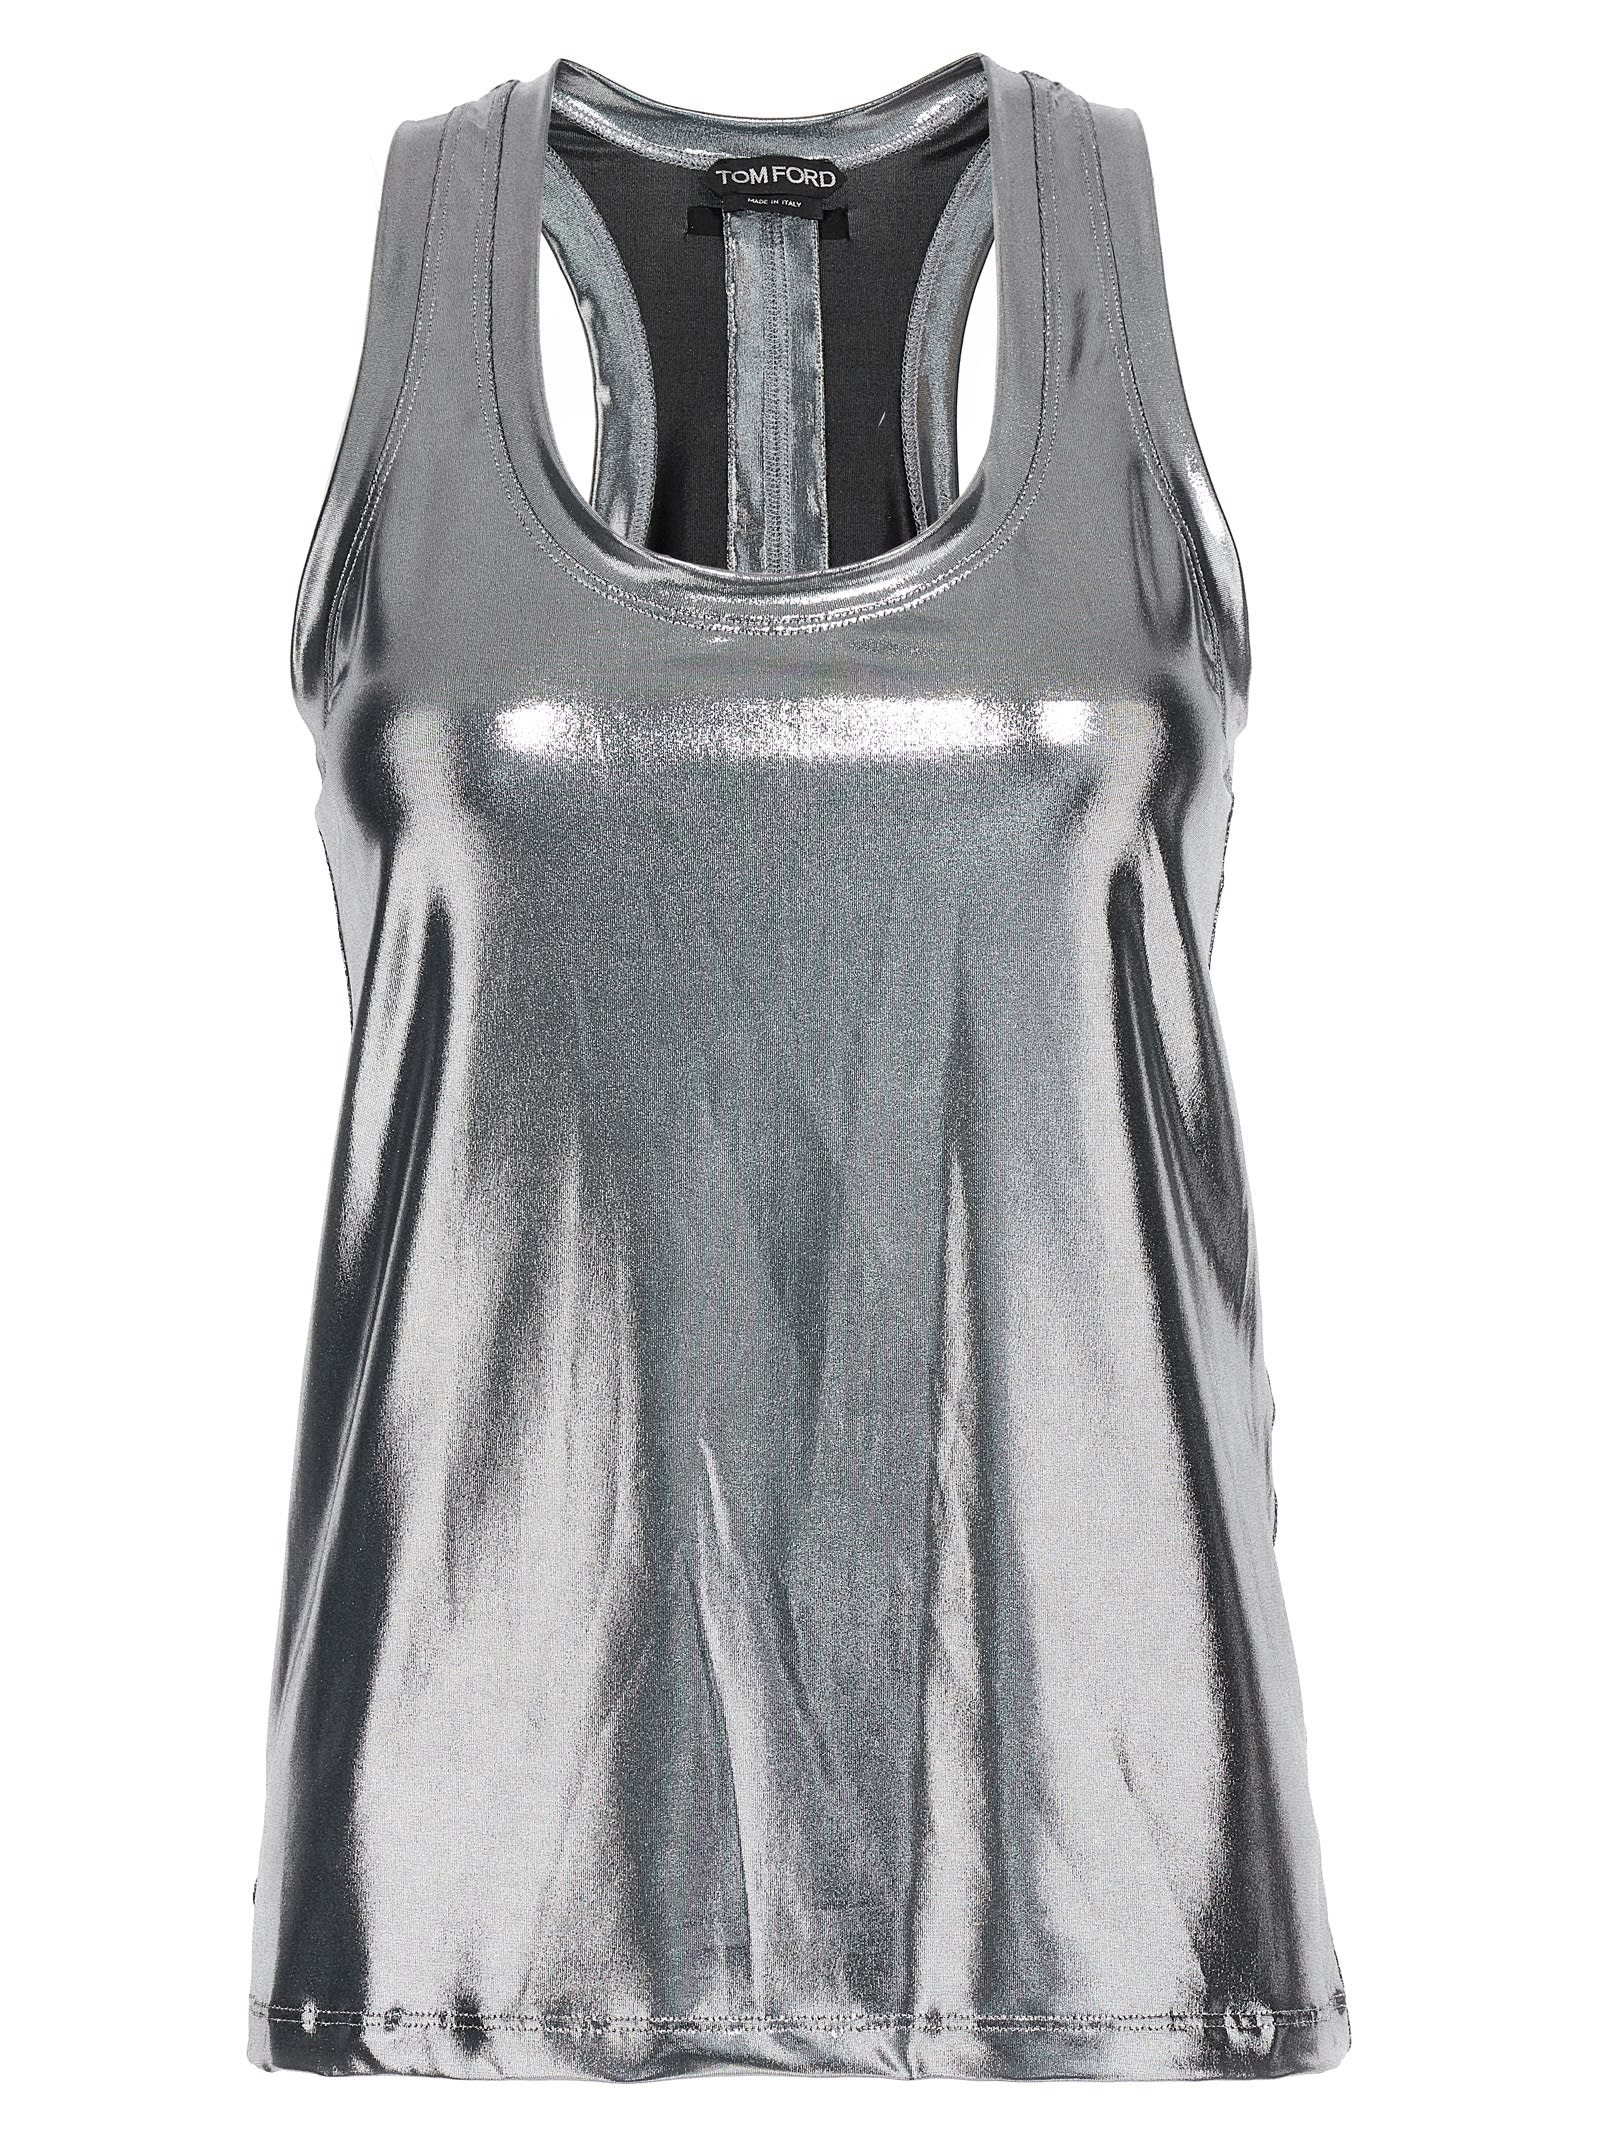 TOM FORD LAMINATED TOP